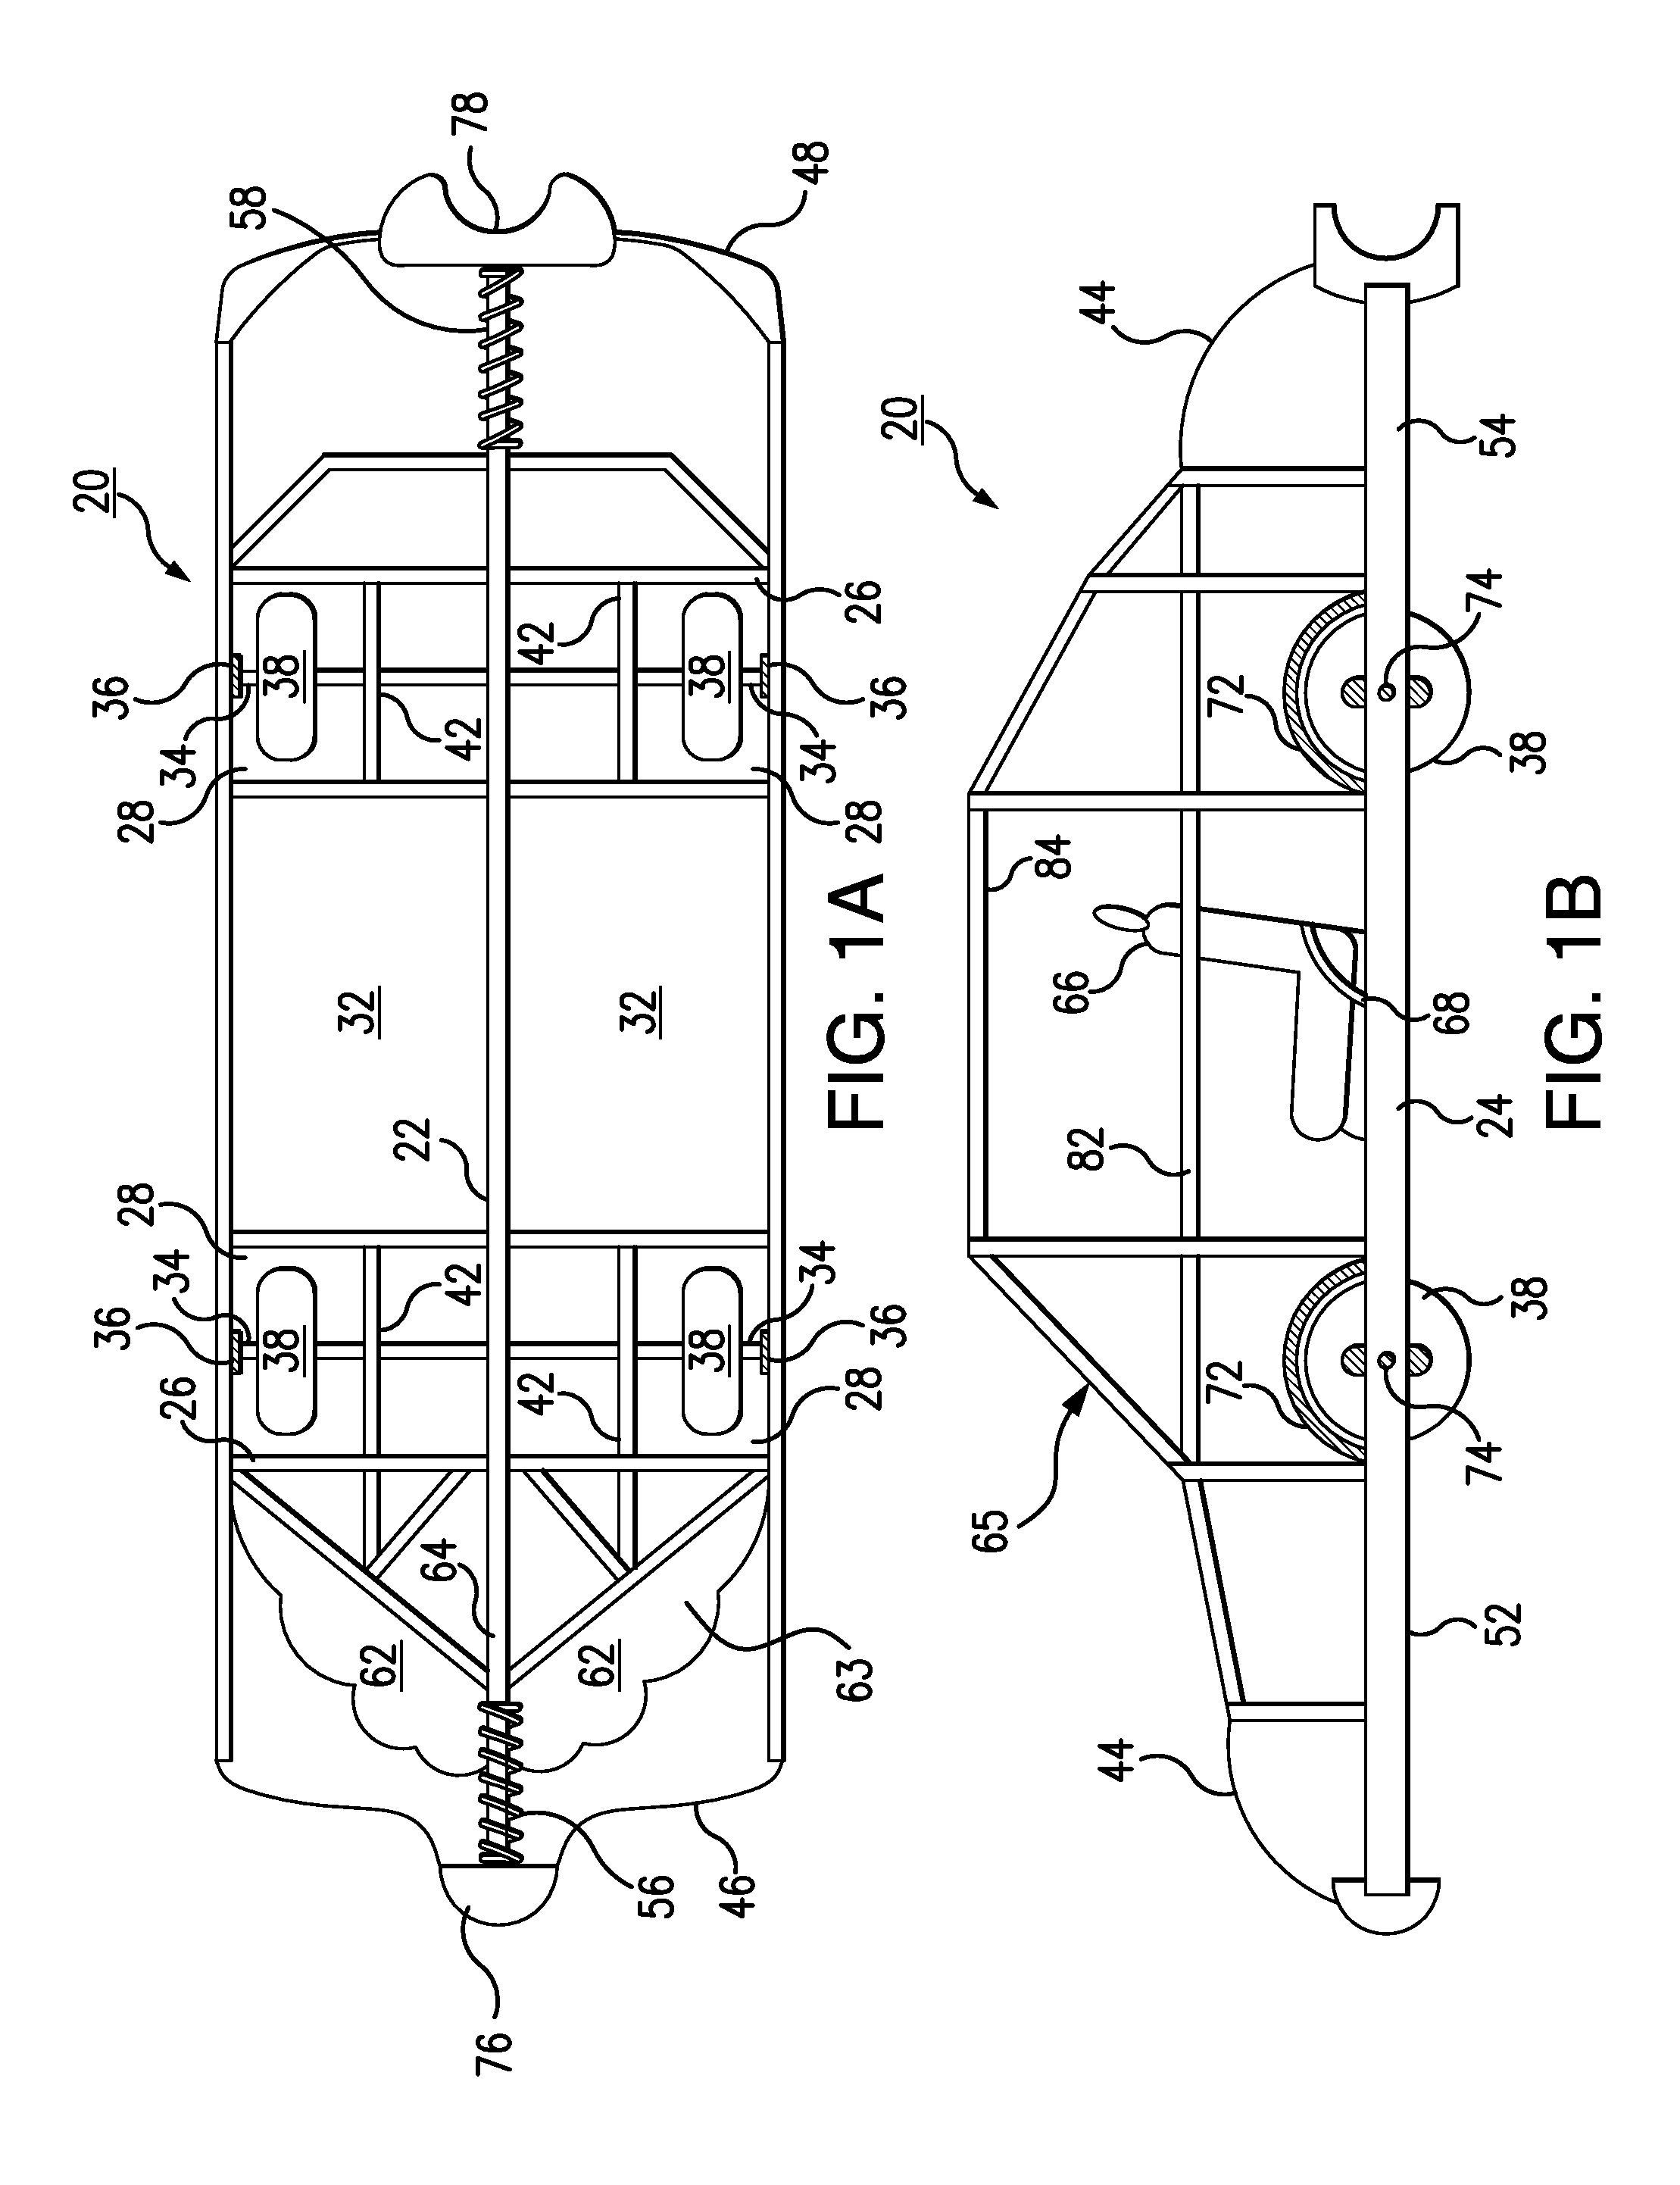 Environment Adaptive Electric Vehicle with Lock On Security and Control Saddle